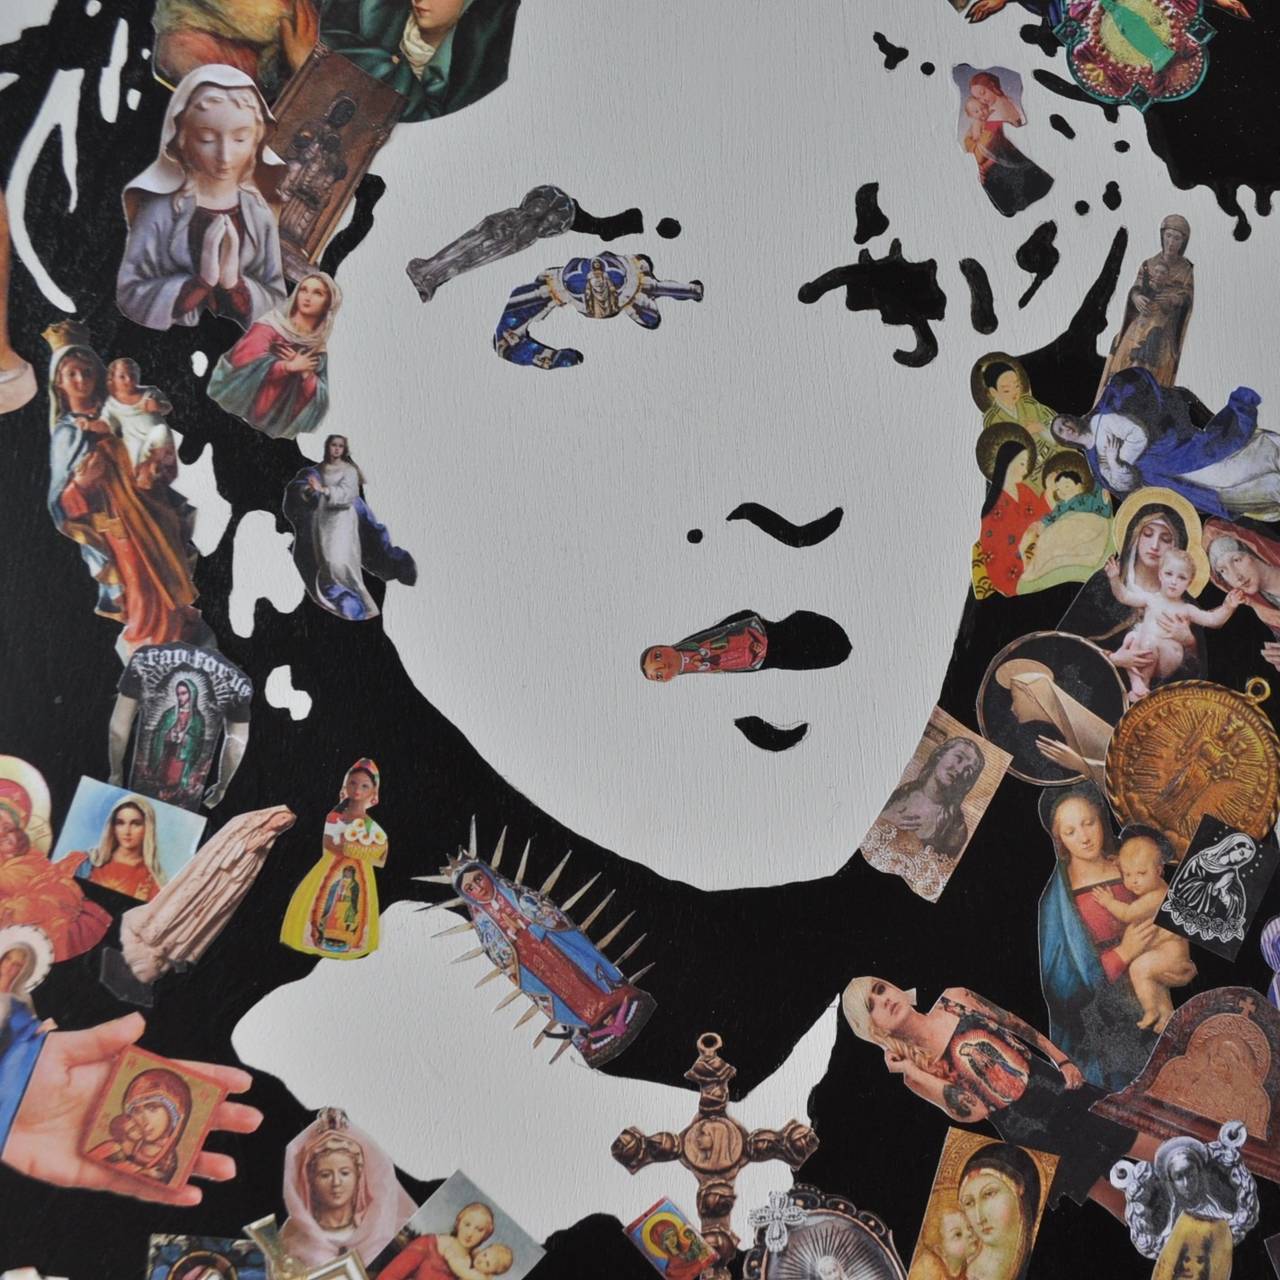 This innovative mixed media piece by artist Dennis Stevens uses images of the Virgin Mary (the Madonna) to portray the Queen of Pop, cultural icon Madonna. The piece is on wood.